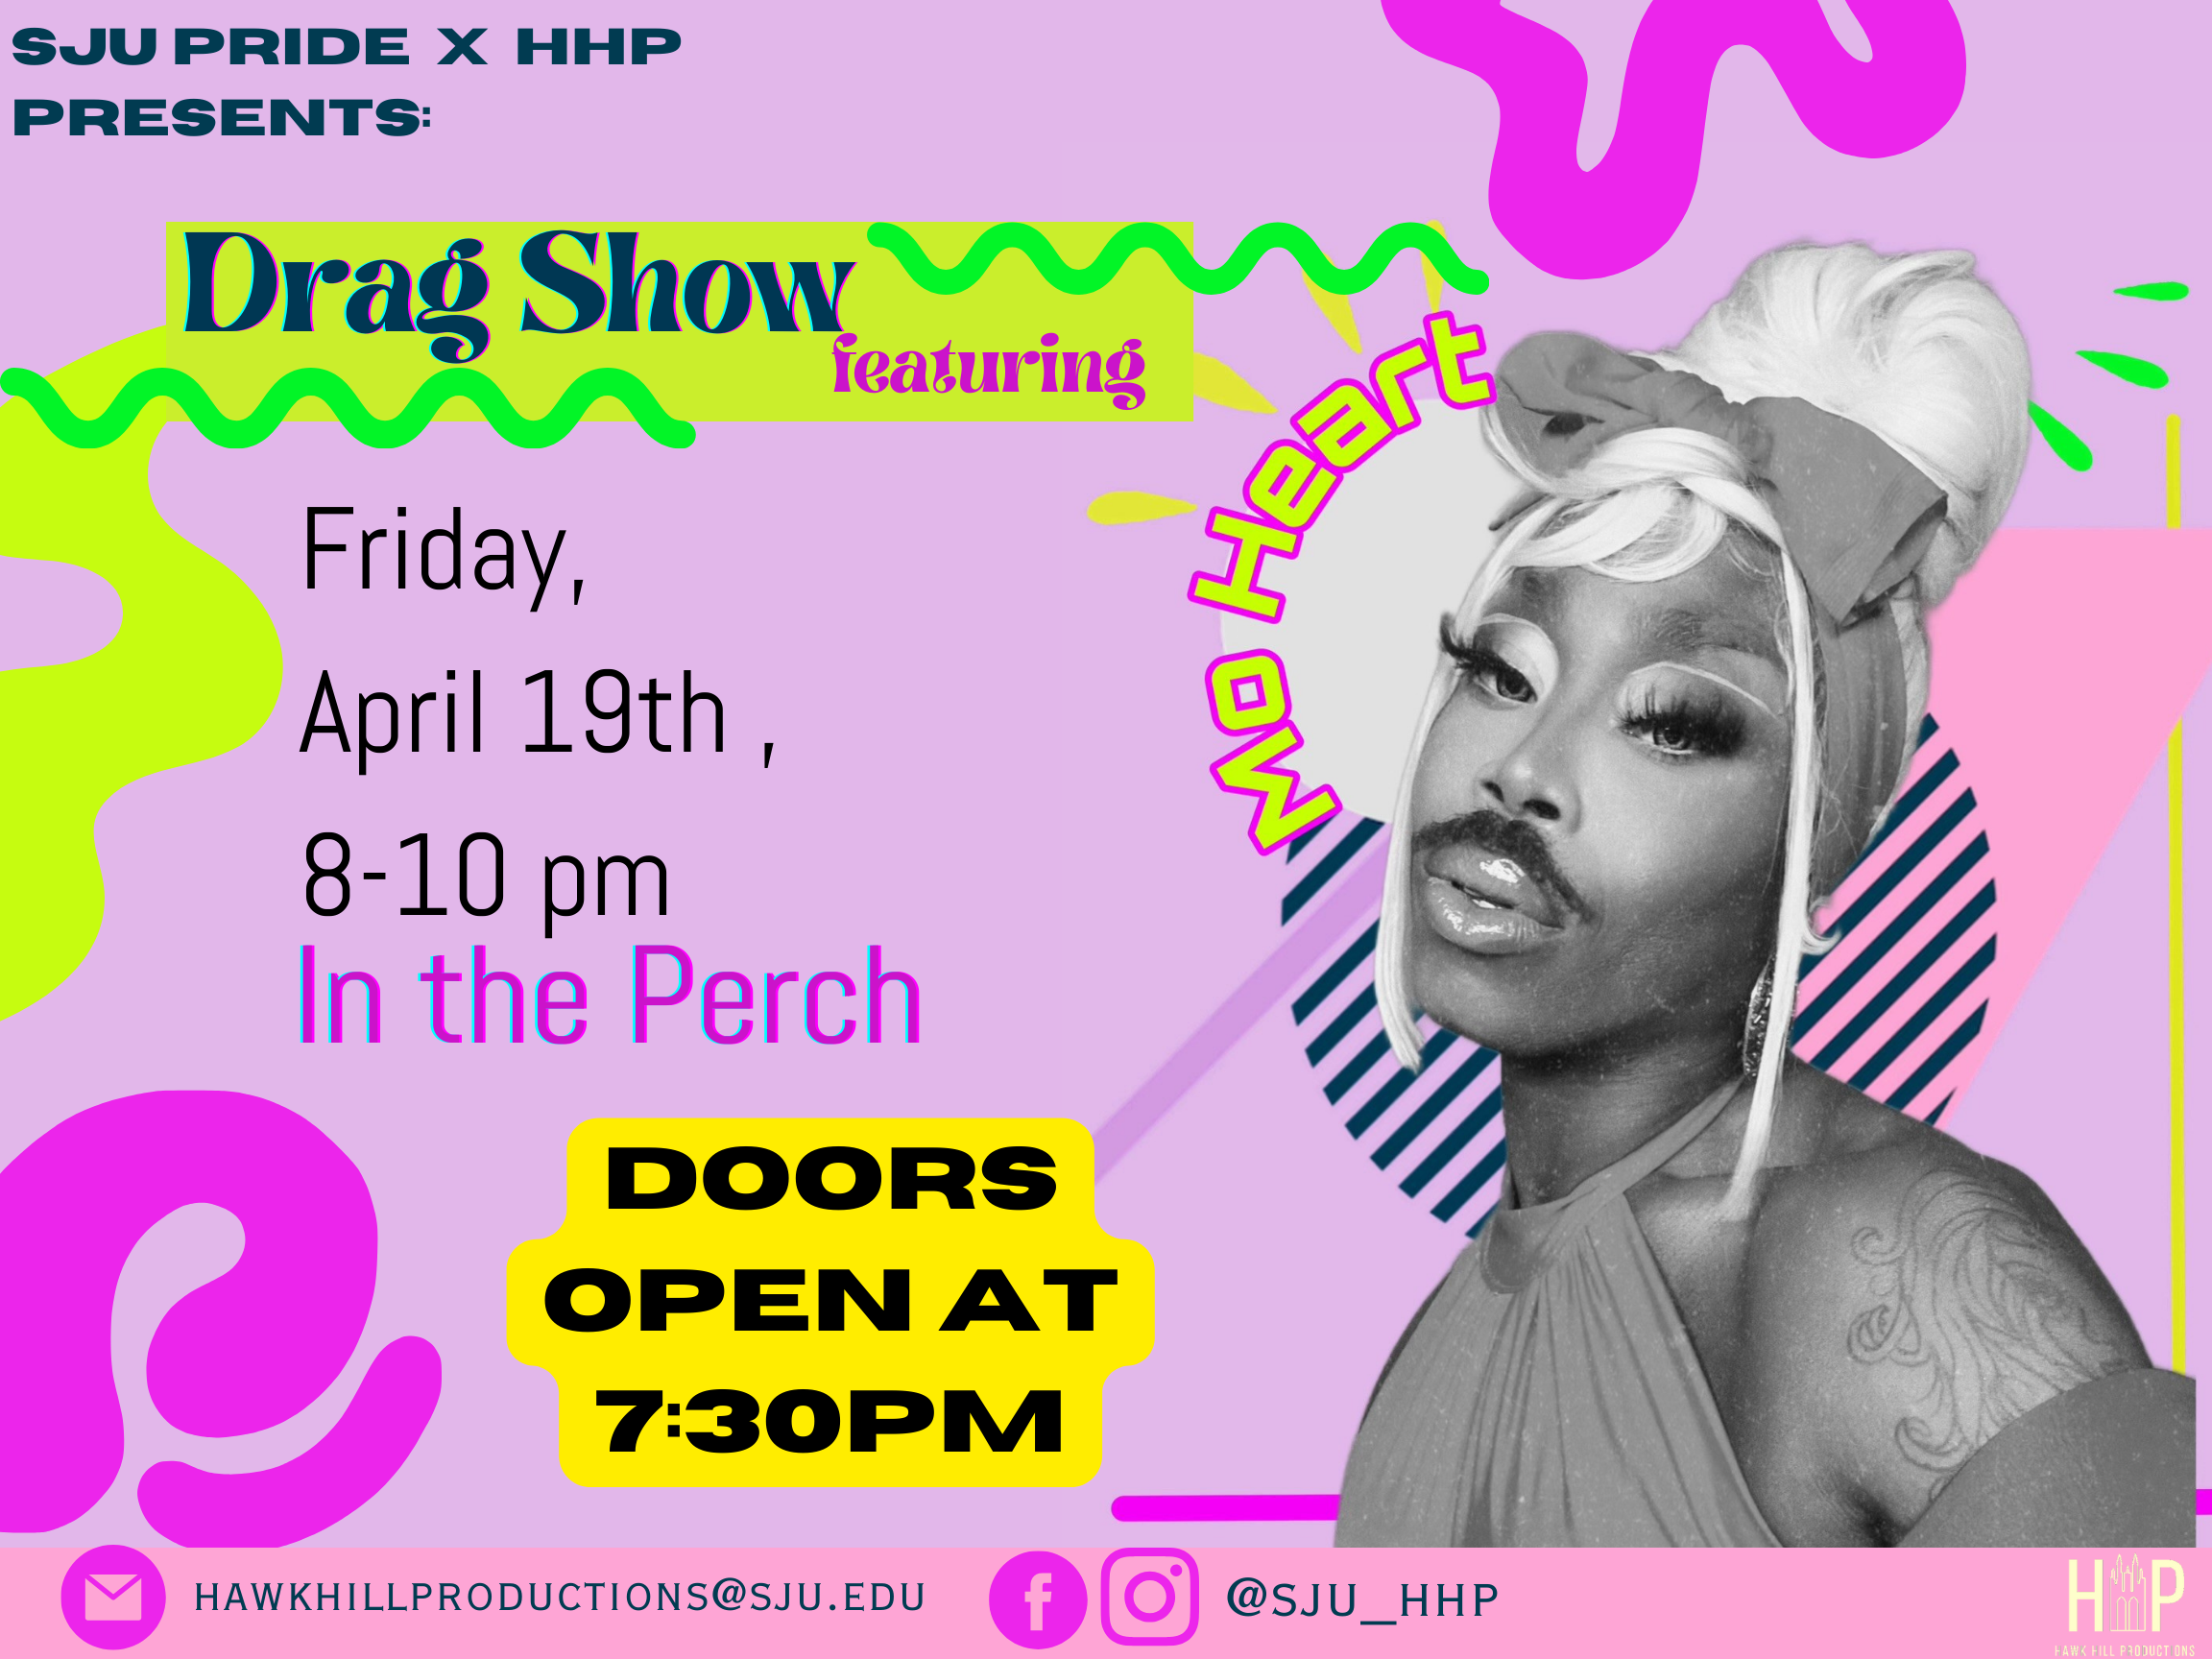 This image is a flyer promoting an on campus Drag Show event featuring Queen Mo Heart, for Students at Saint Joseph's University. The flyer is very bright and colorful featuring vibrant purples, pinks and greens, with a photo of Mo Heart on the right hand side of the flyer. There is text on the left side of the document outlining the details of the event such as date and time and location. At the bottom of the image there is contact information for Hawk Hill Productions 